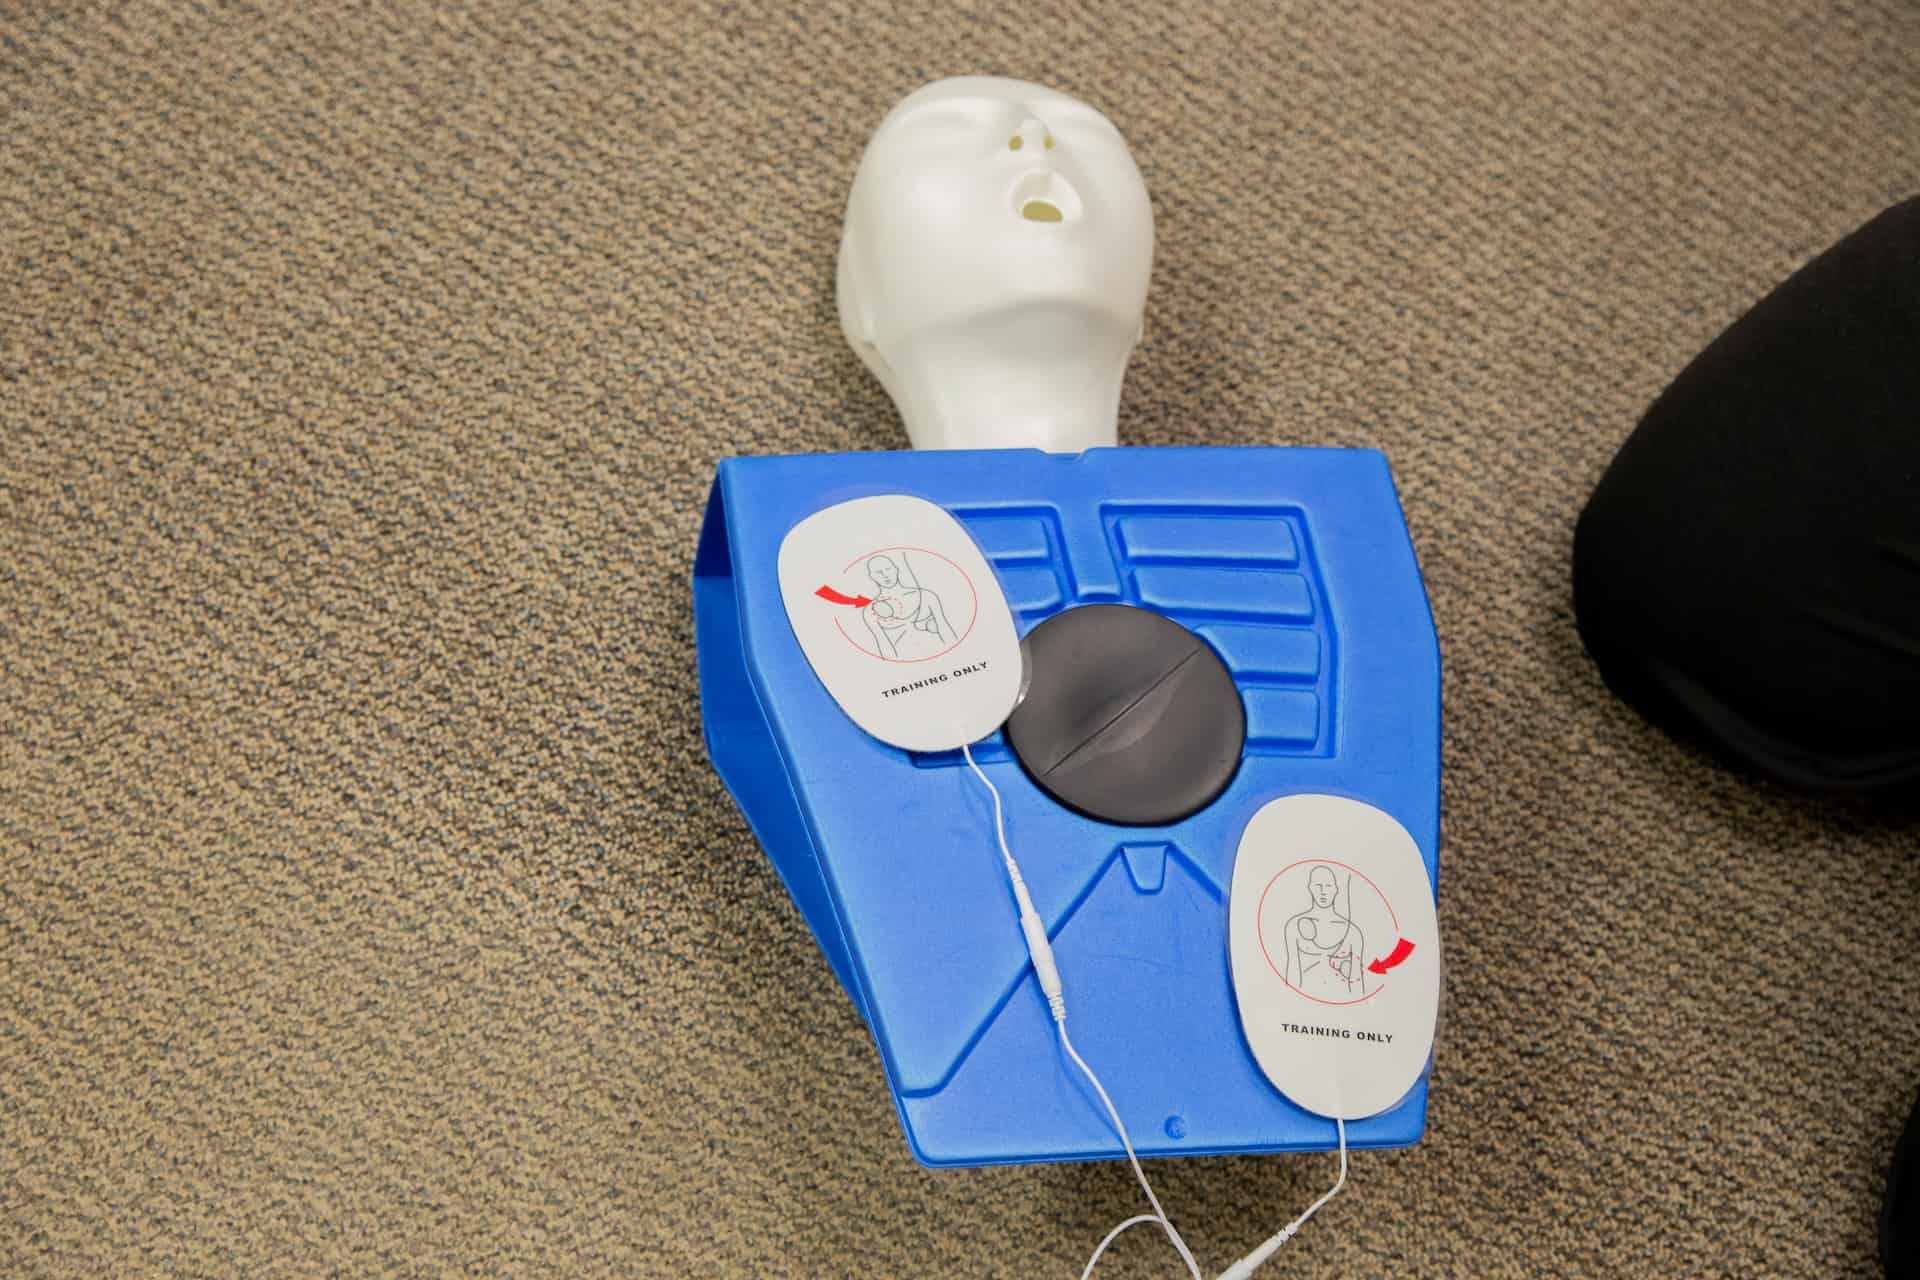 Electrode defibrillation pads applied to a CPR test dummy